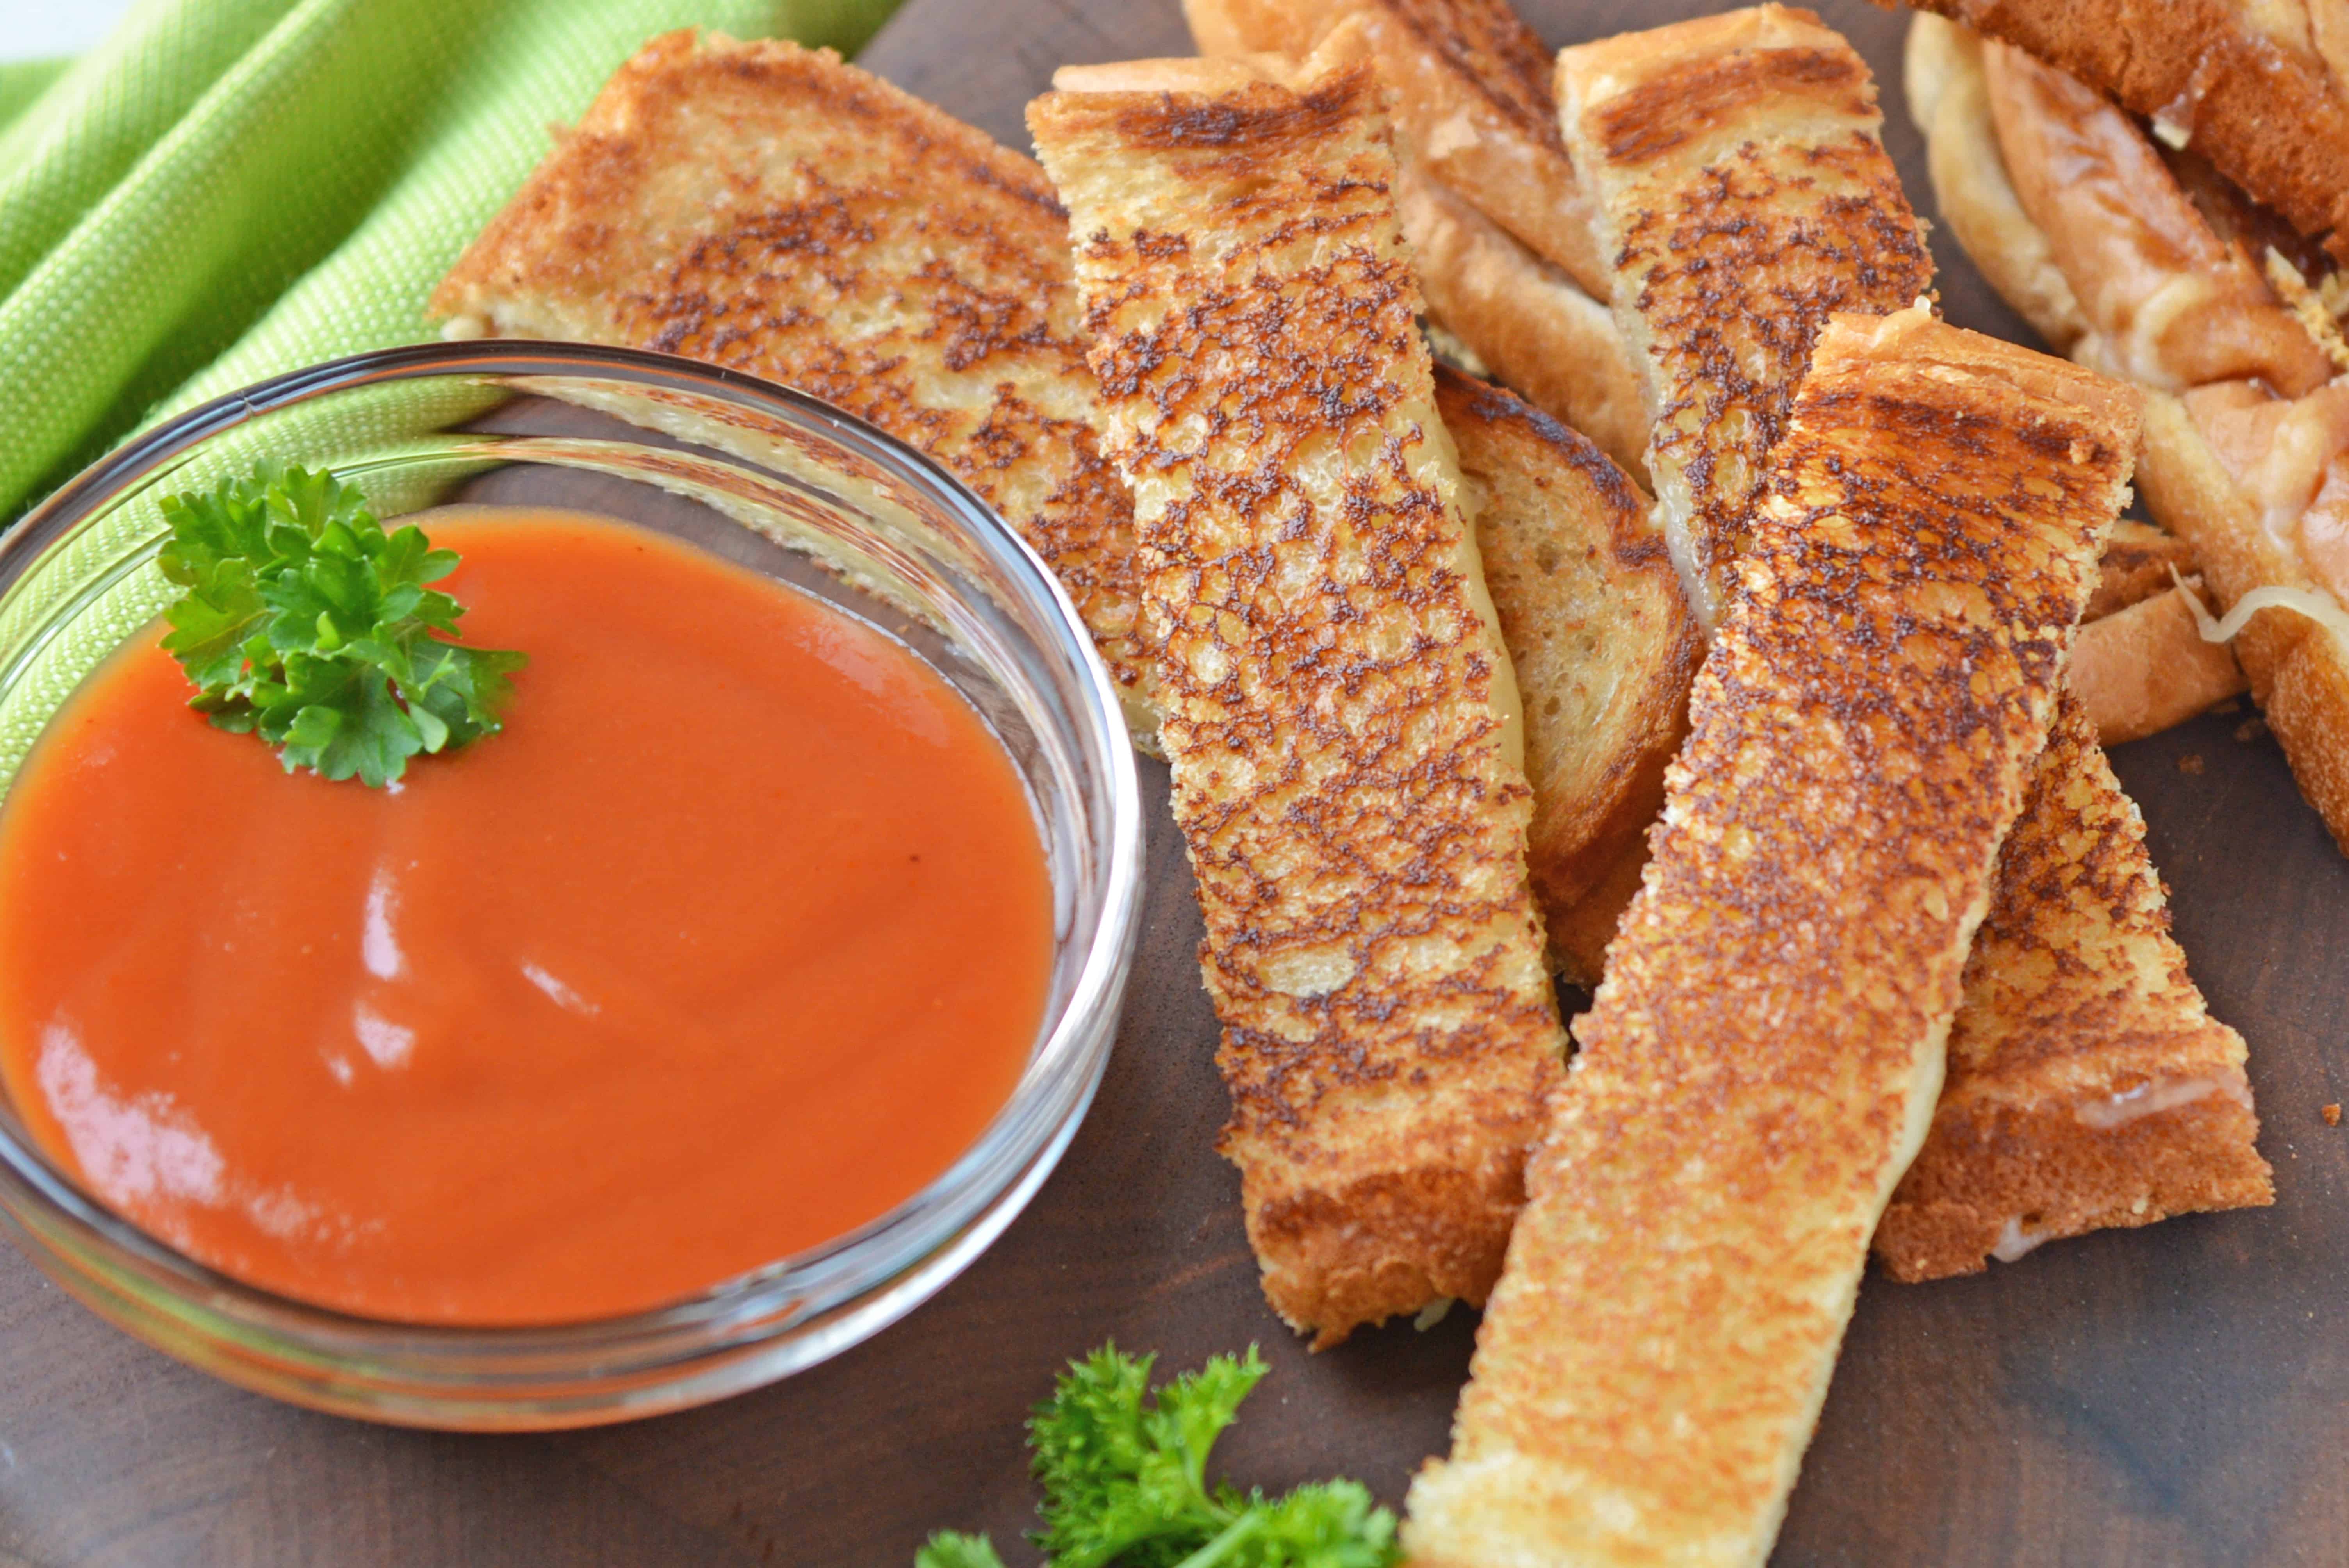 Grilled Cheese Sticks make your childhood favorite into a party-worthy appetizer! Pair with tomato soup or tomato jam for an upscale grilled cheese sandwich recipe. #grilledcheeserecipe www.savoryexperiments.com 